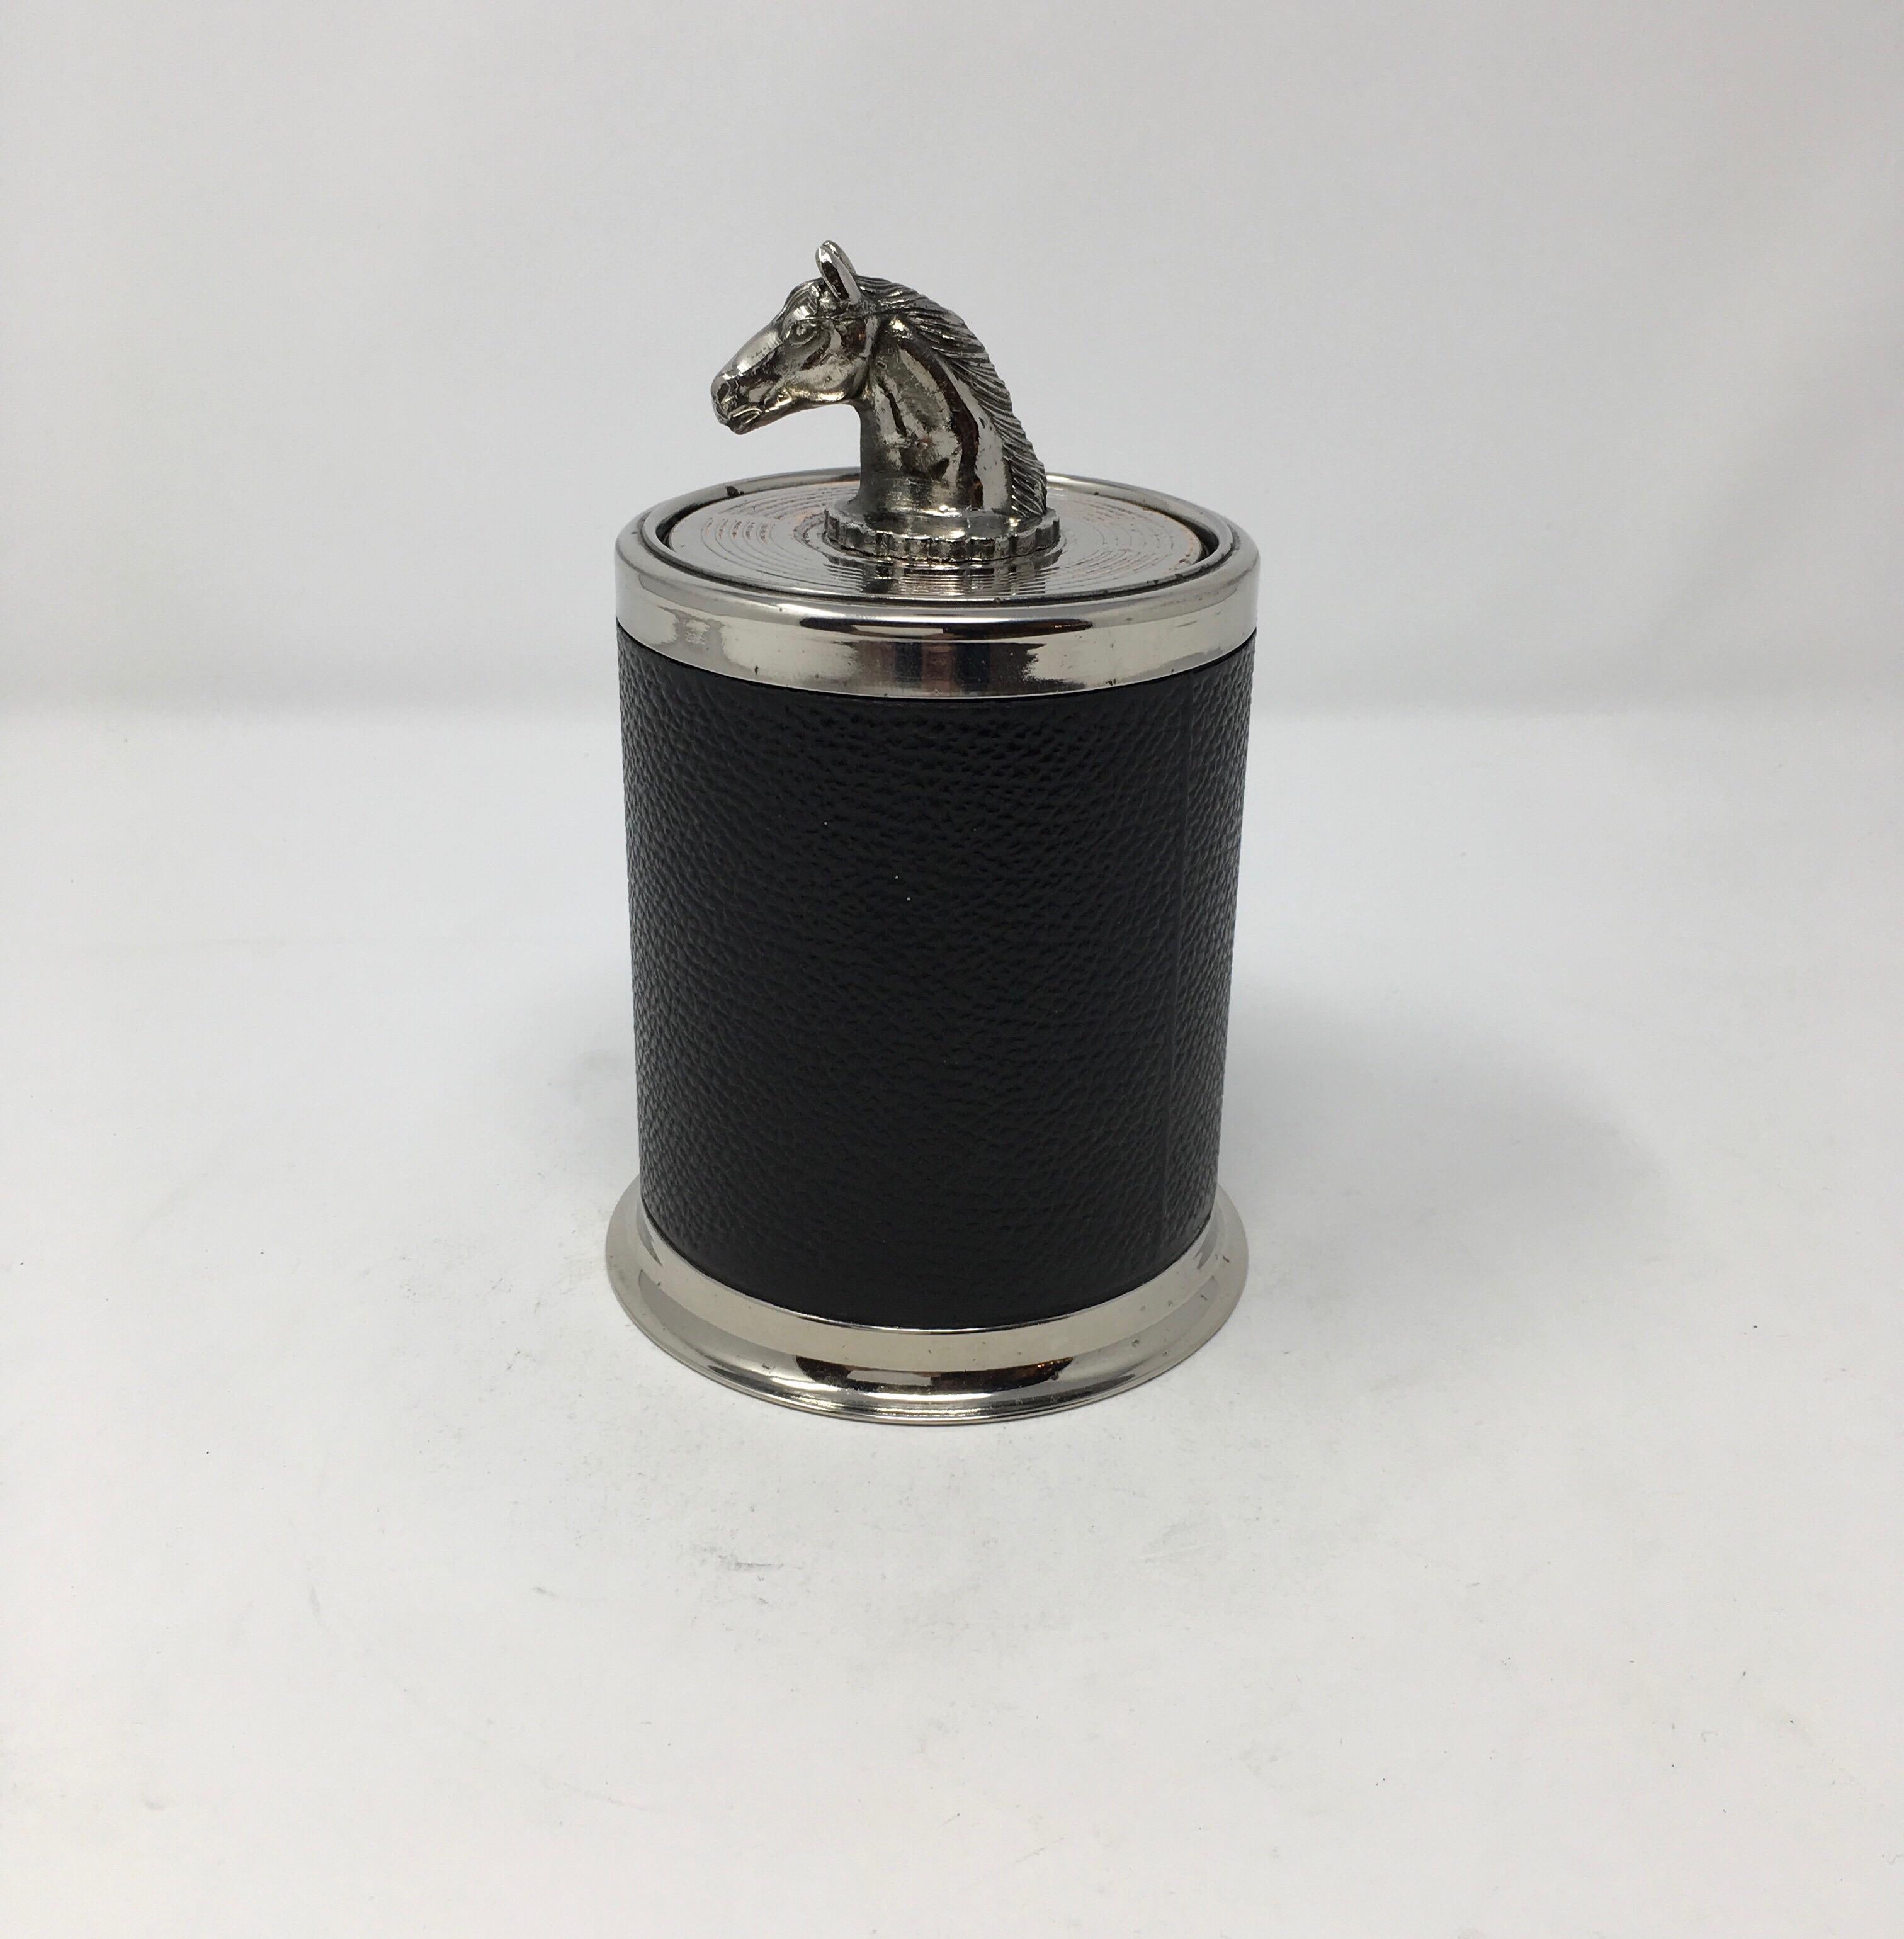 This is a leather and chrome pop up cigarette holder. A perfect accessory for the smoker or horse lover. The piece opens by pulling the horse head up and has space to store 18 cigarettes inside. In very nice original condition.